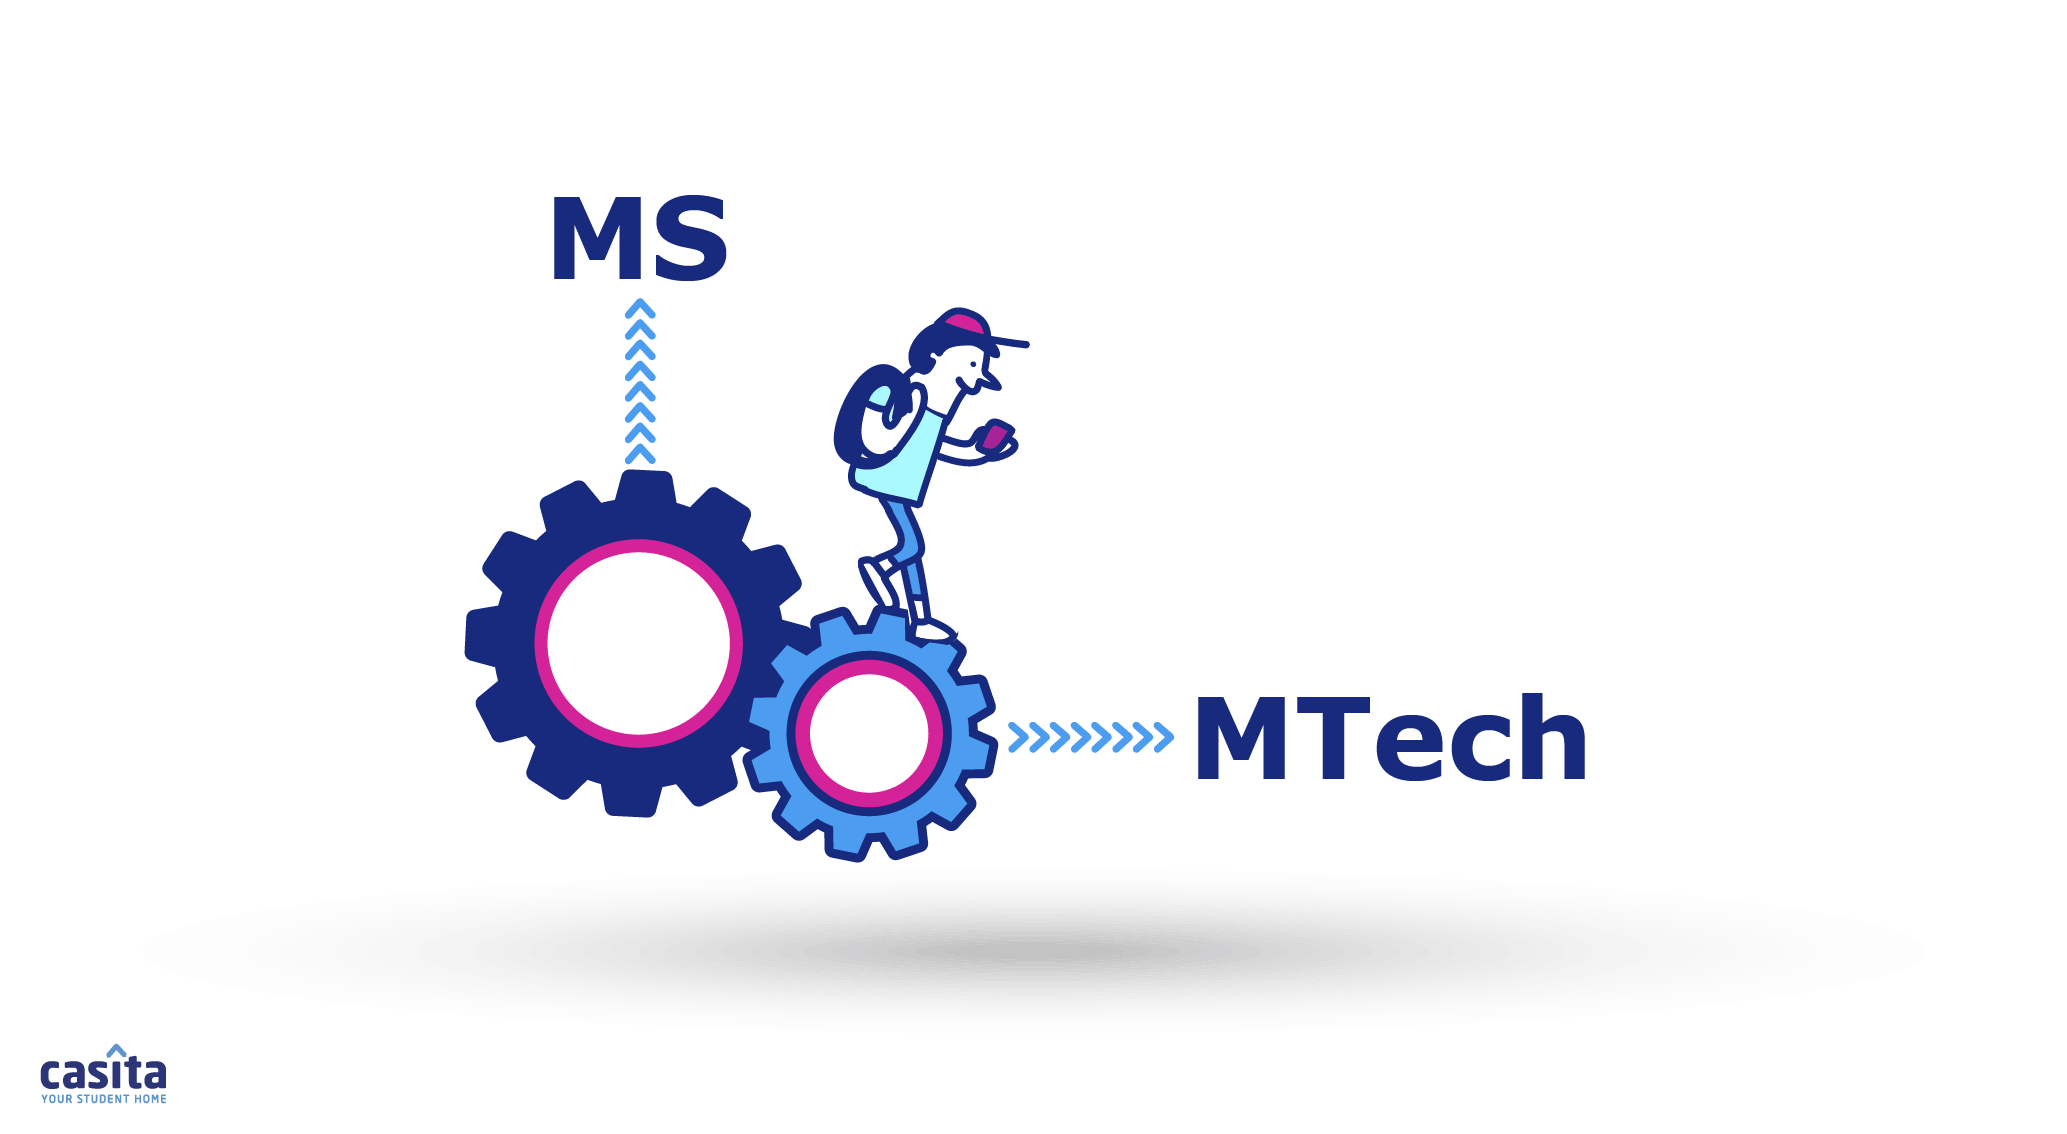 What Is The Difference Between MS and MTech?